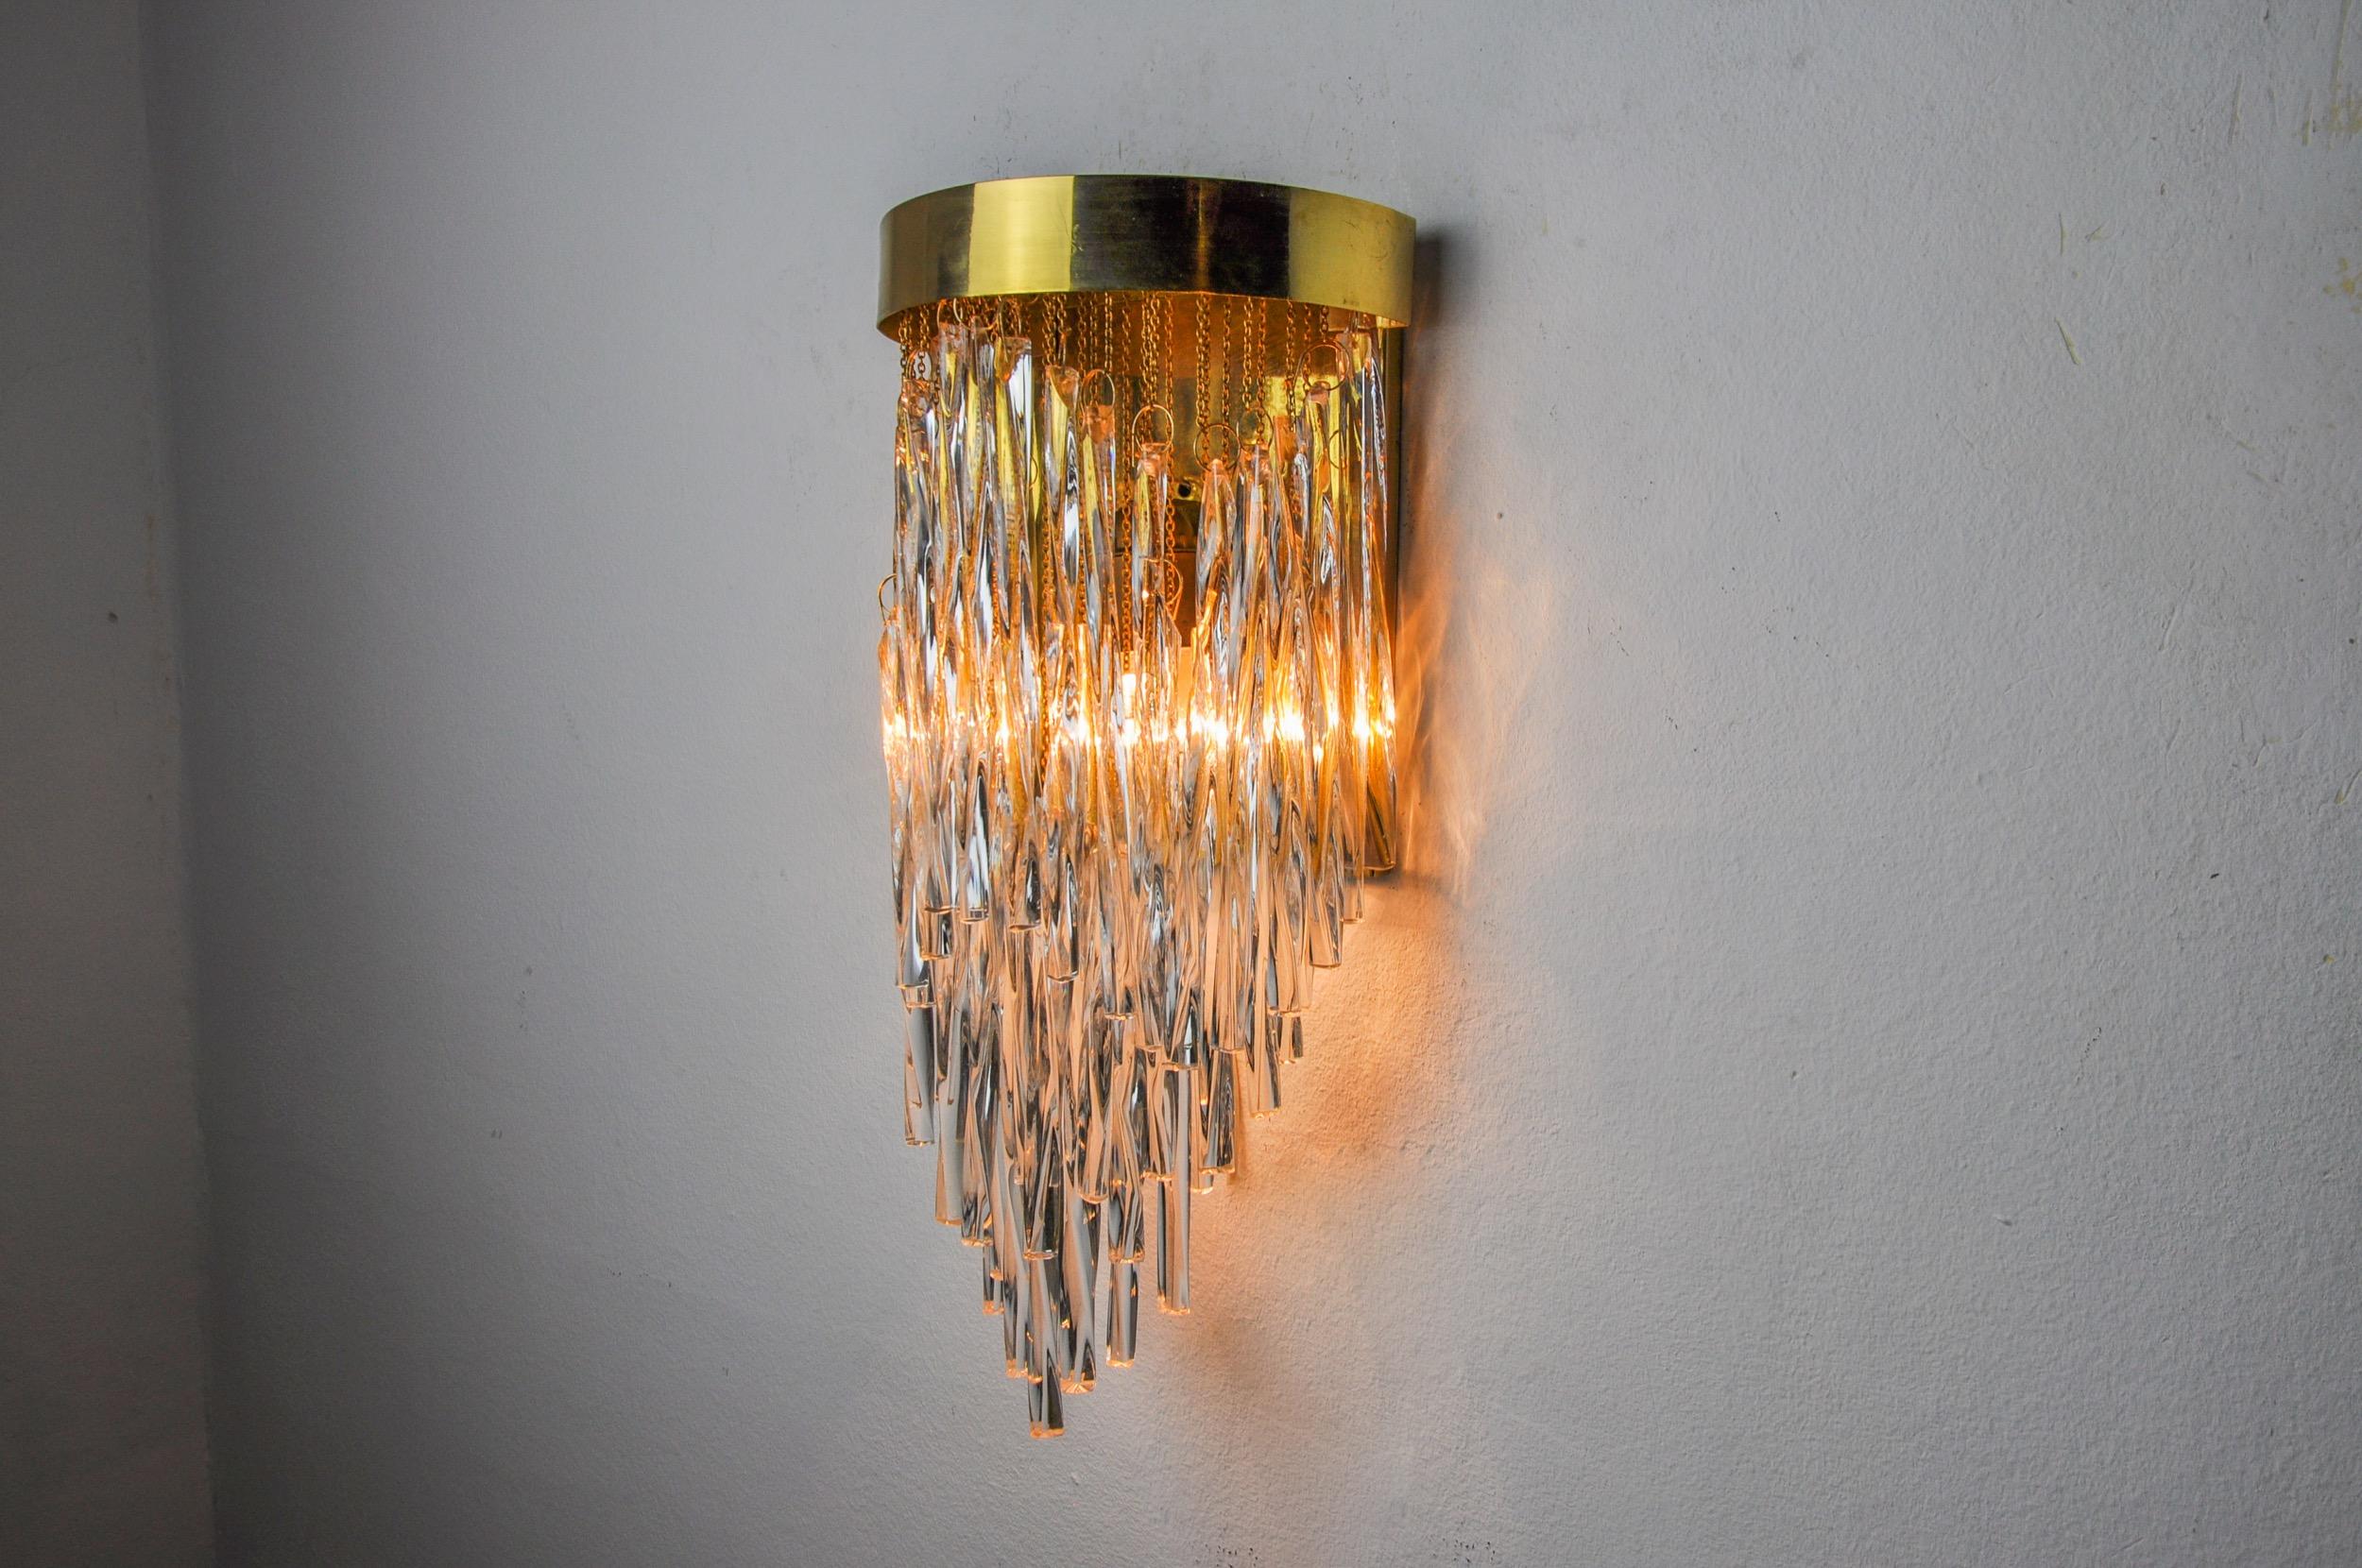 Superb and rare Venini waterfall wall light designed and produced in Italy in the 1970s. Wall light made up of murano glass rods distributed in a cascade on a brass structure. Magnificent decorative object which will illuminate your interior